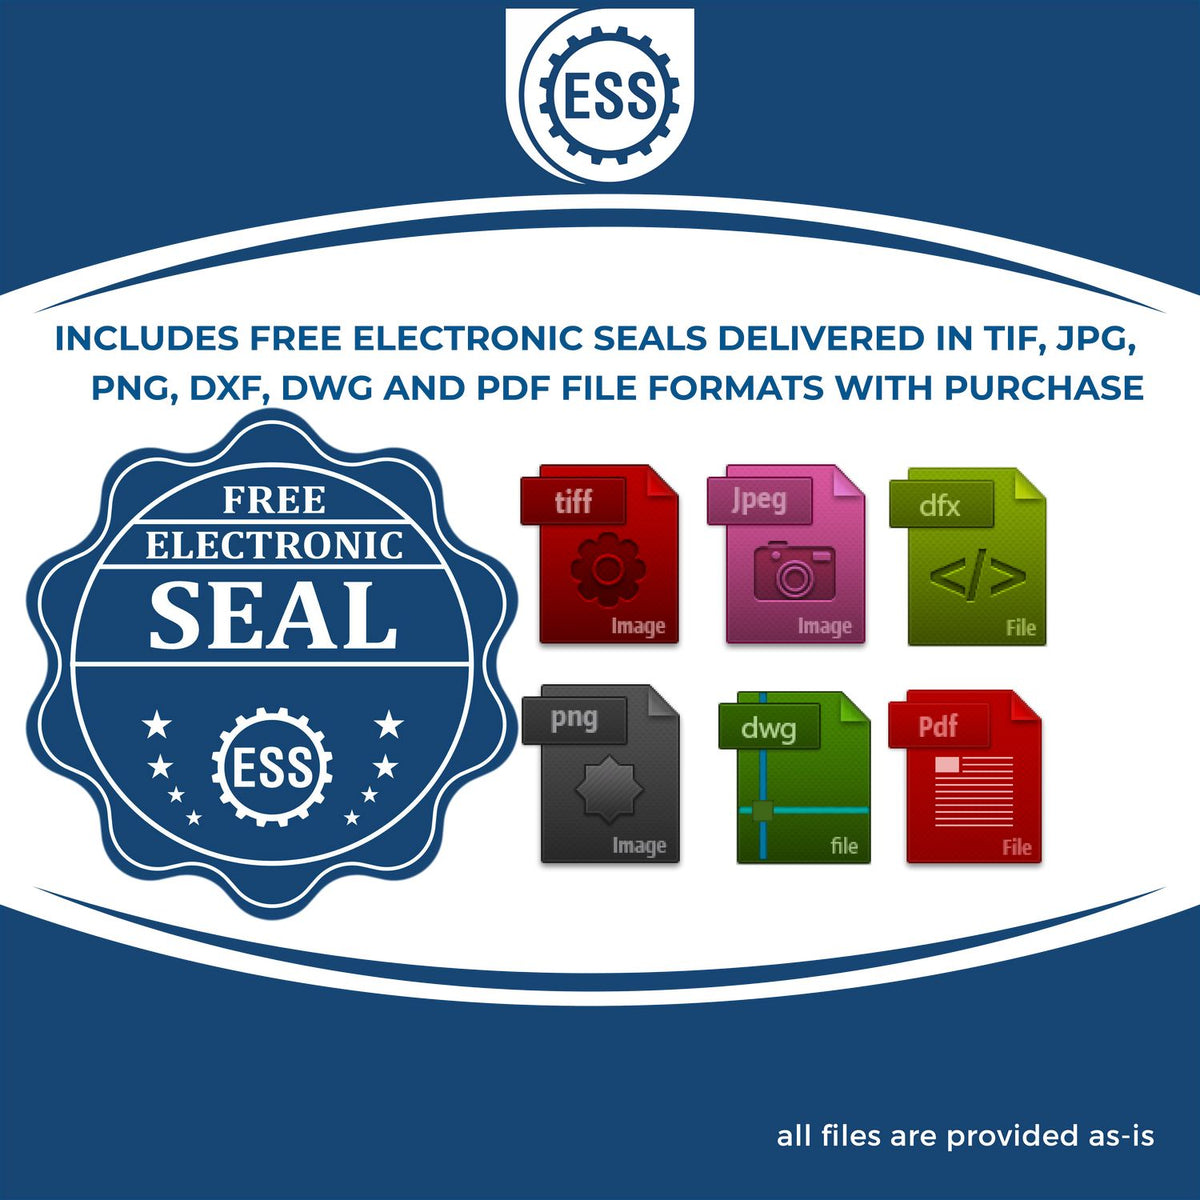 An infographic for the free electronic seal for the Self-Inking Michigan PE Stamp illustrating the different file type icons such as DXF, DWG, TIF, JPG and PNG.